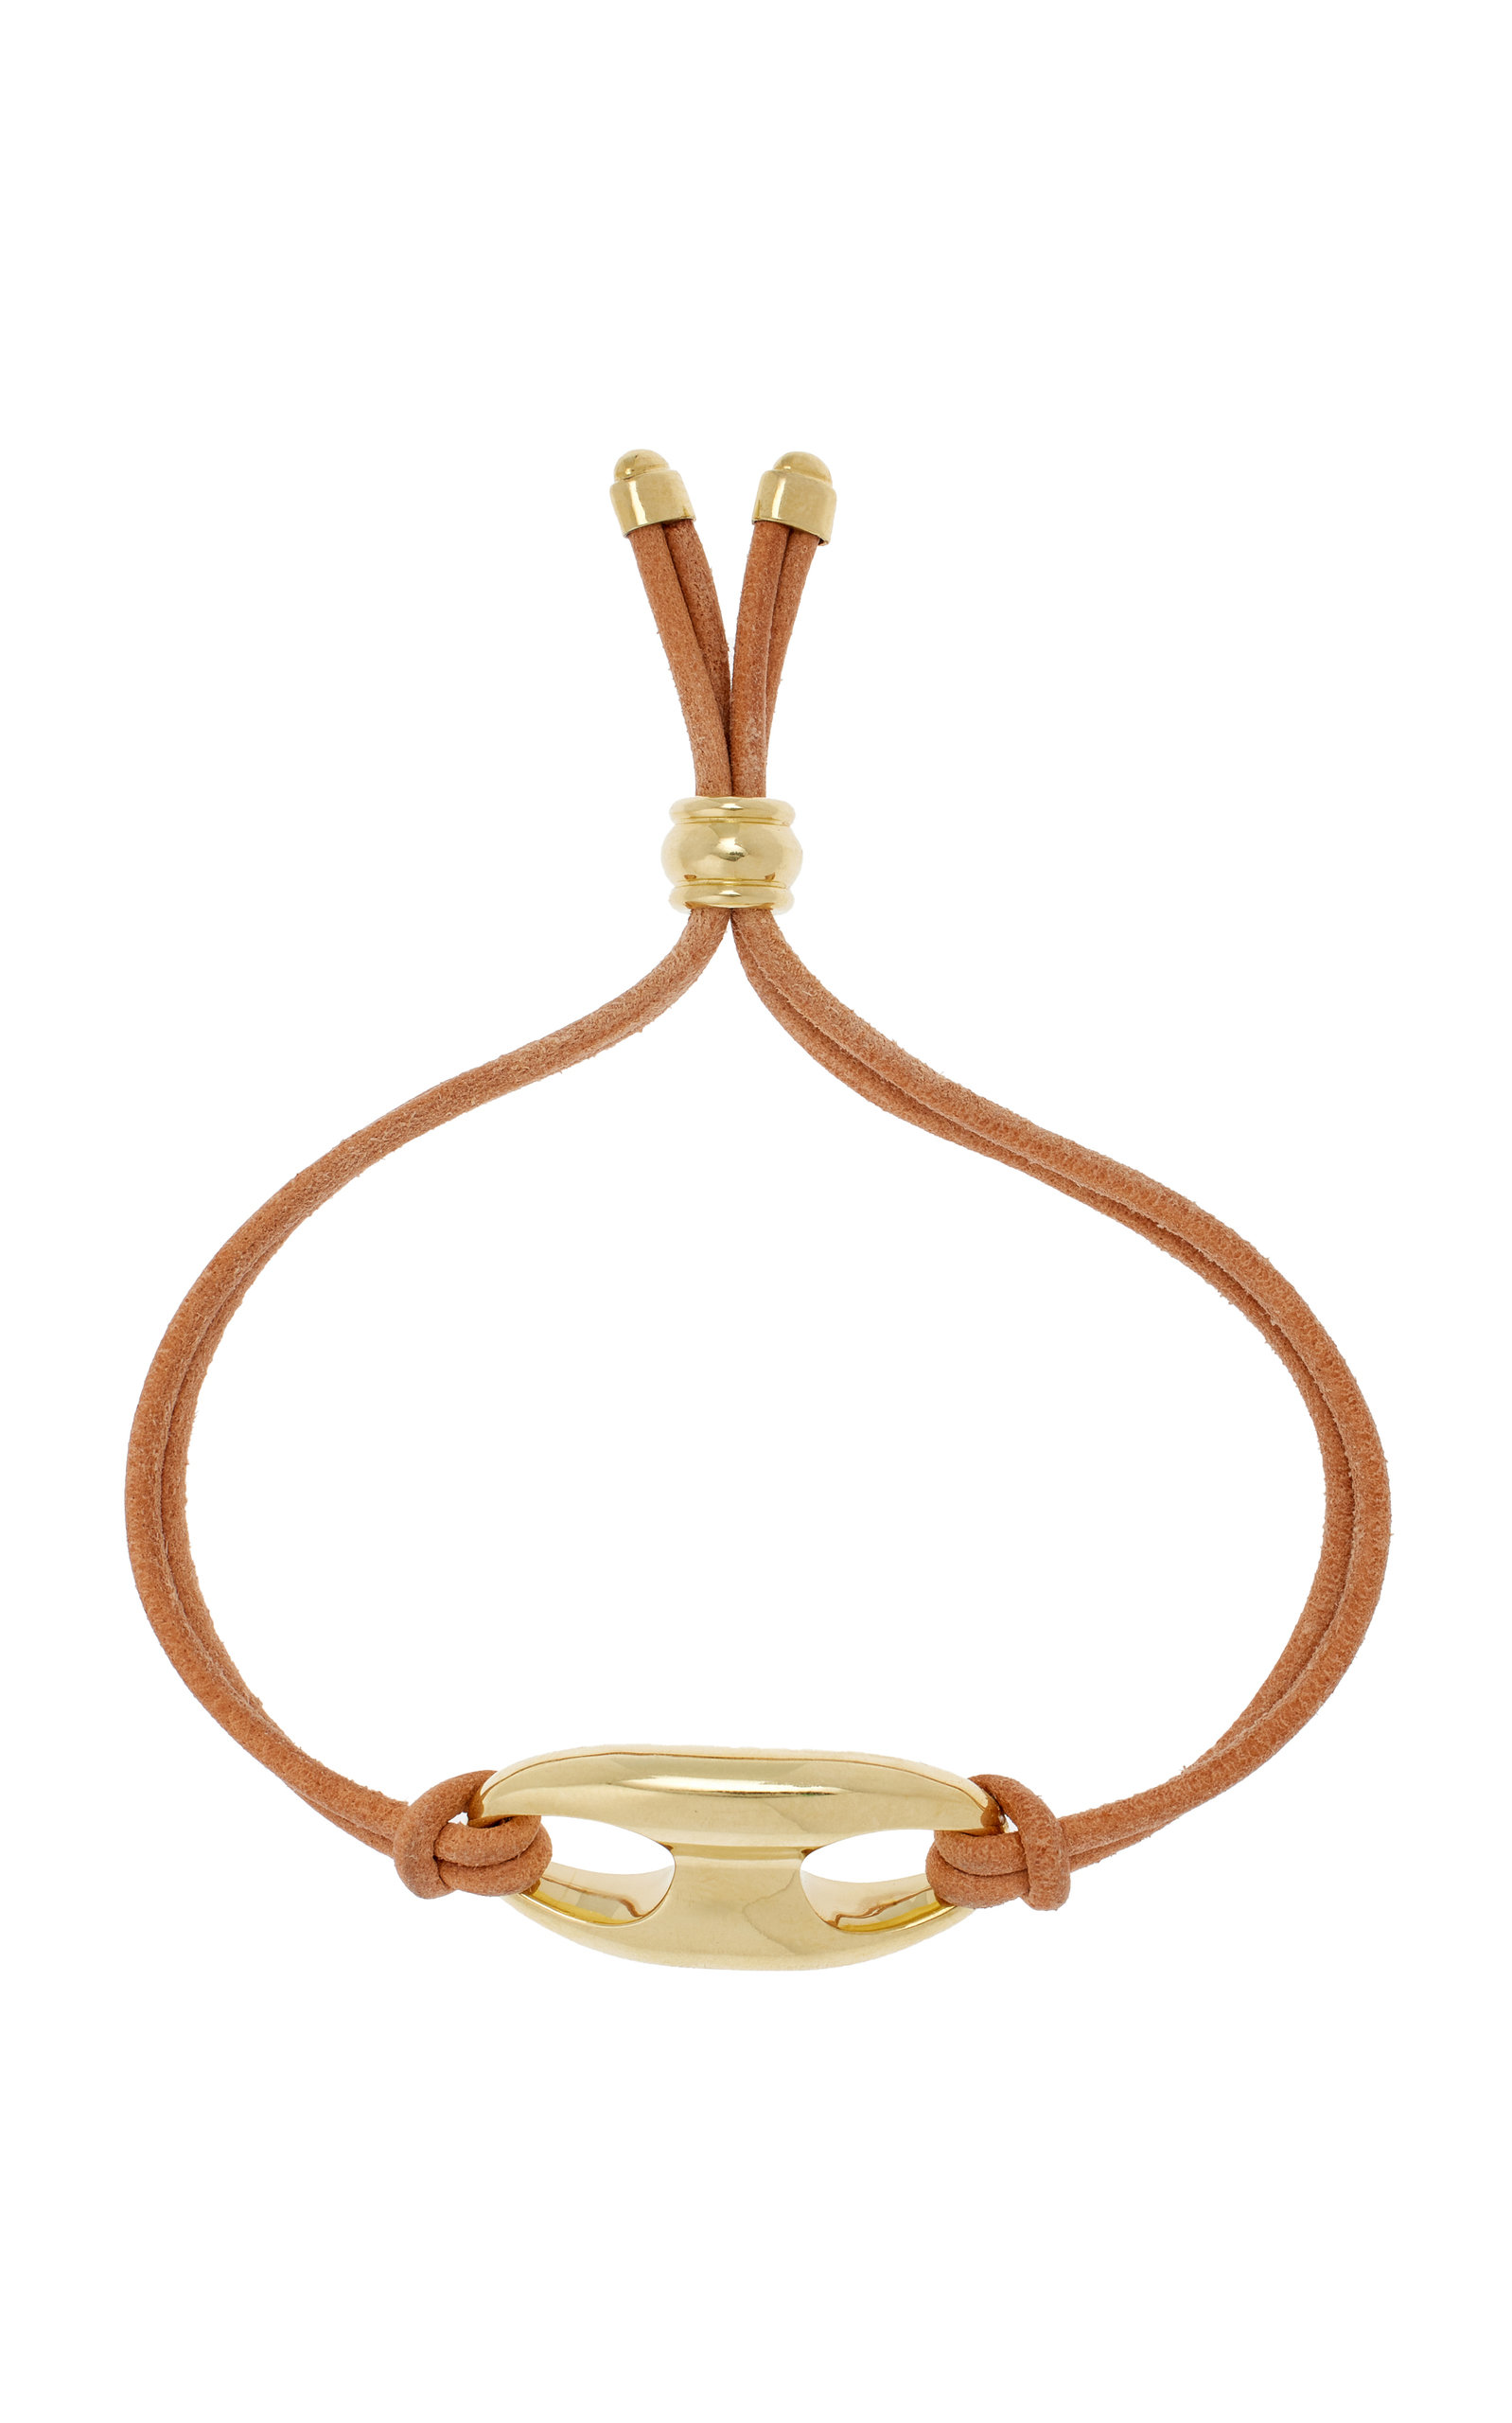 The Small Gold Anchor Link 18K Yellow Gold and Leather Bracelet